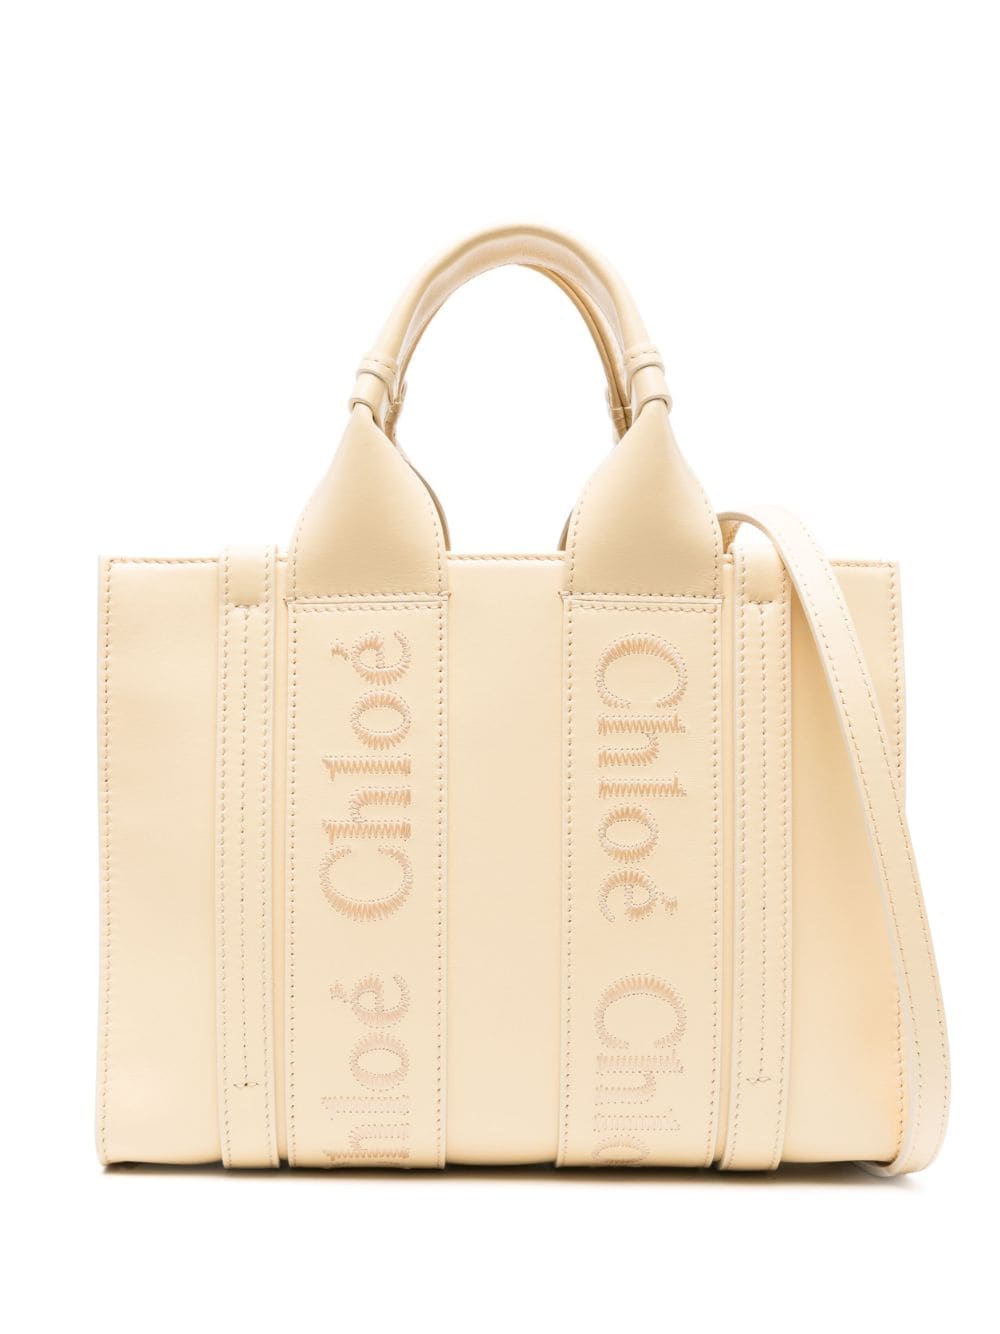 Chloé small Woody leather tote bag - Yellow von Chloé